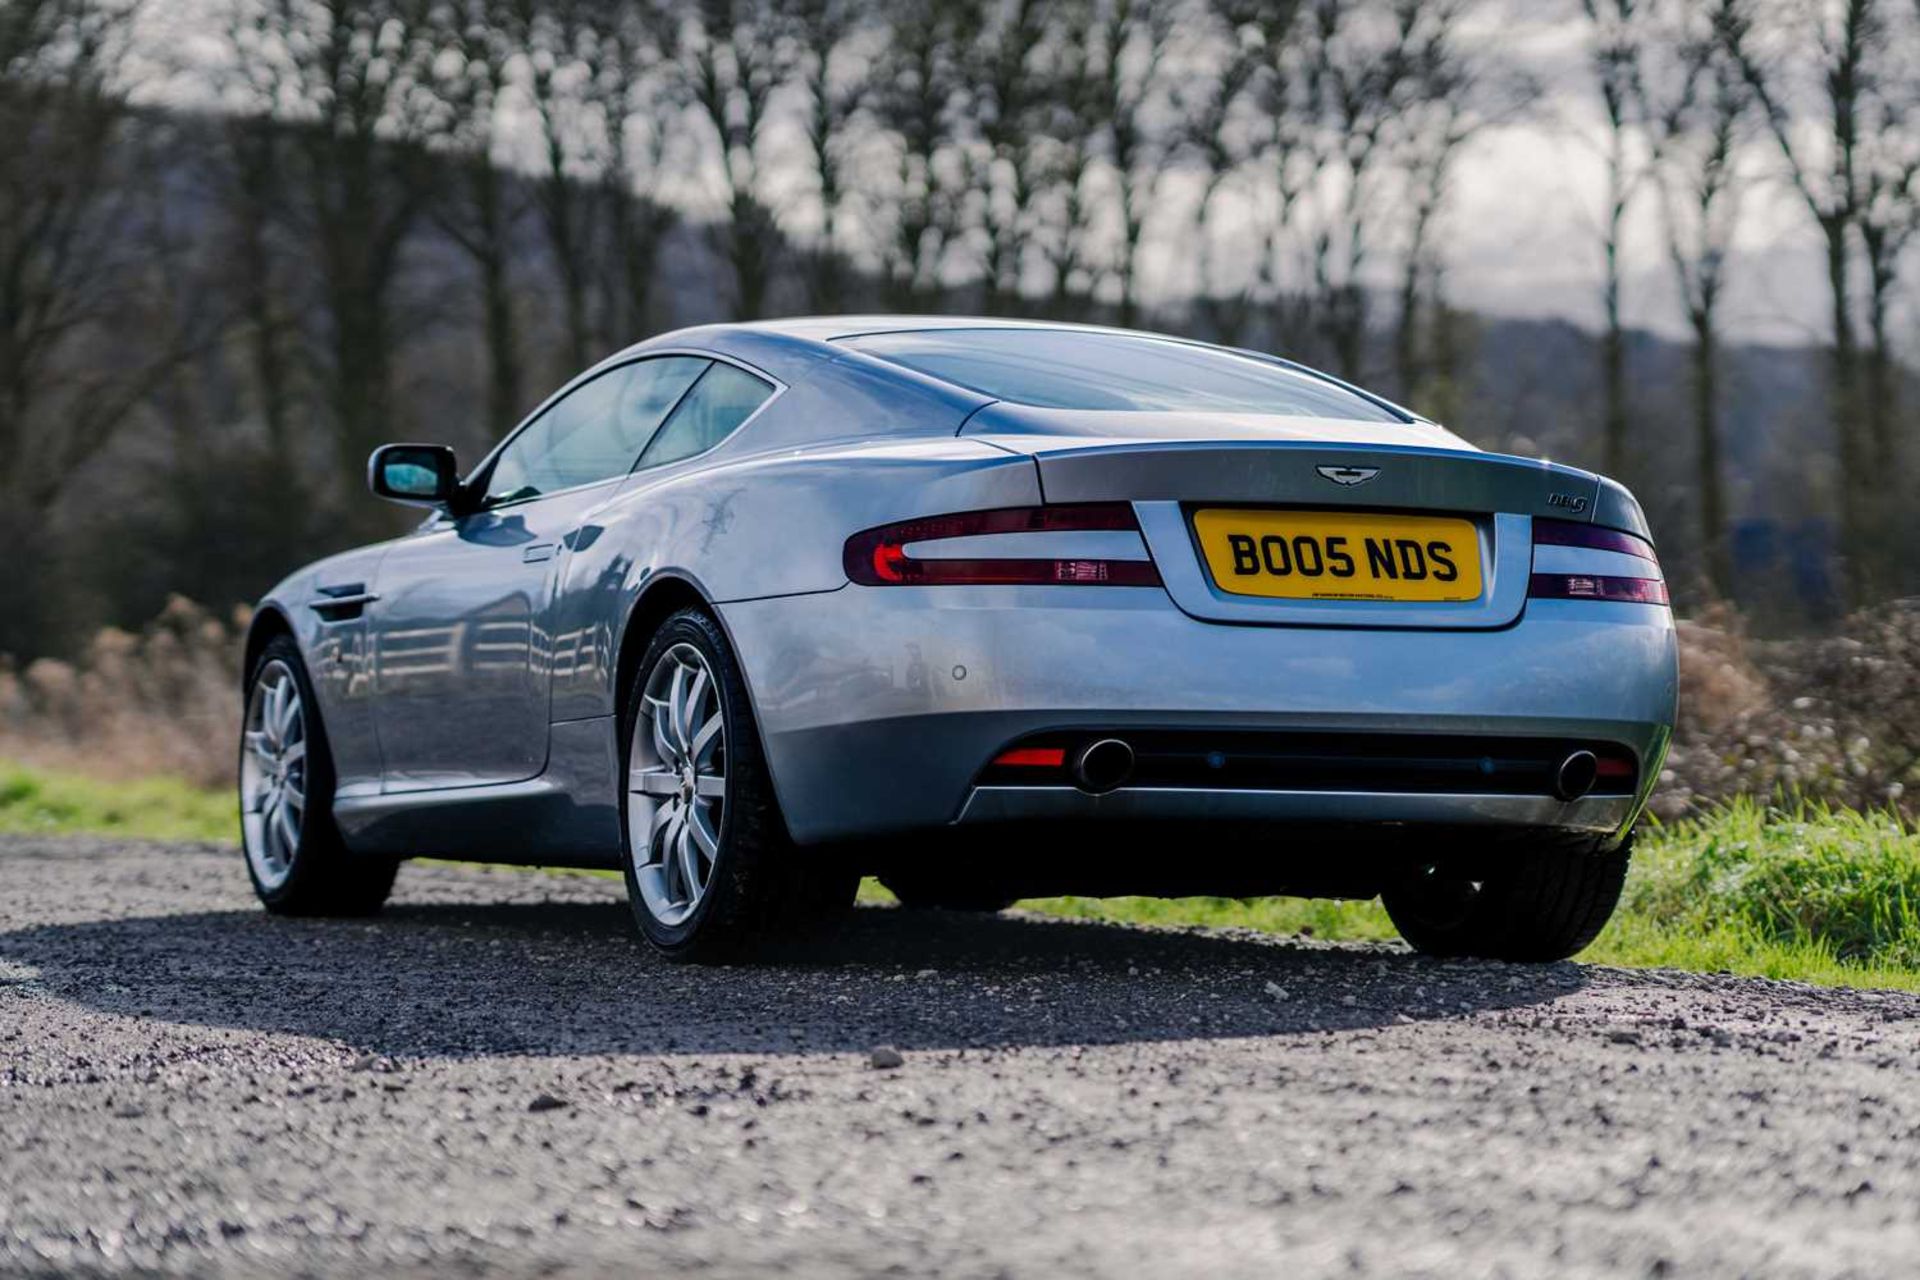 2005 Aston Martin DB9 V12 Only 33,000 miles with full Aston Martin service history - Image 8 of 70